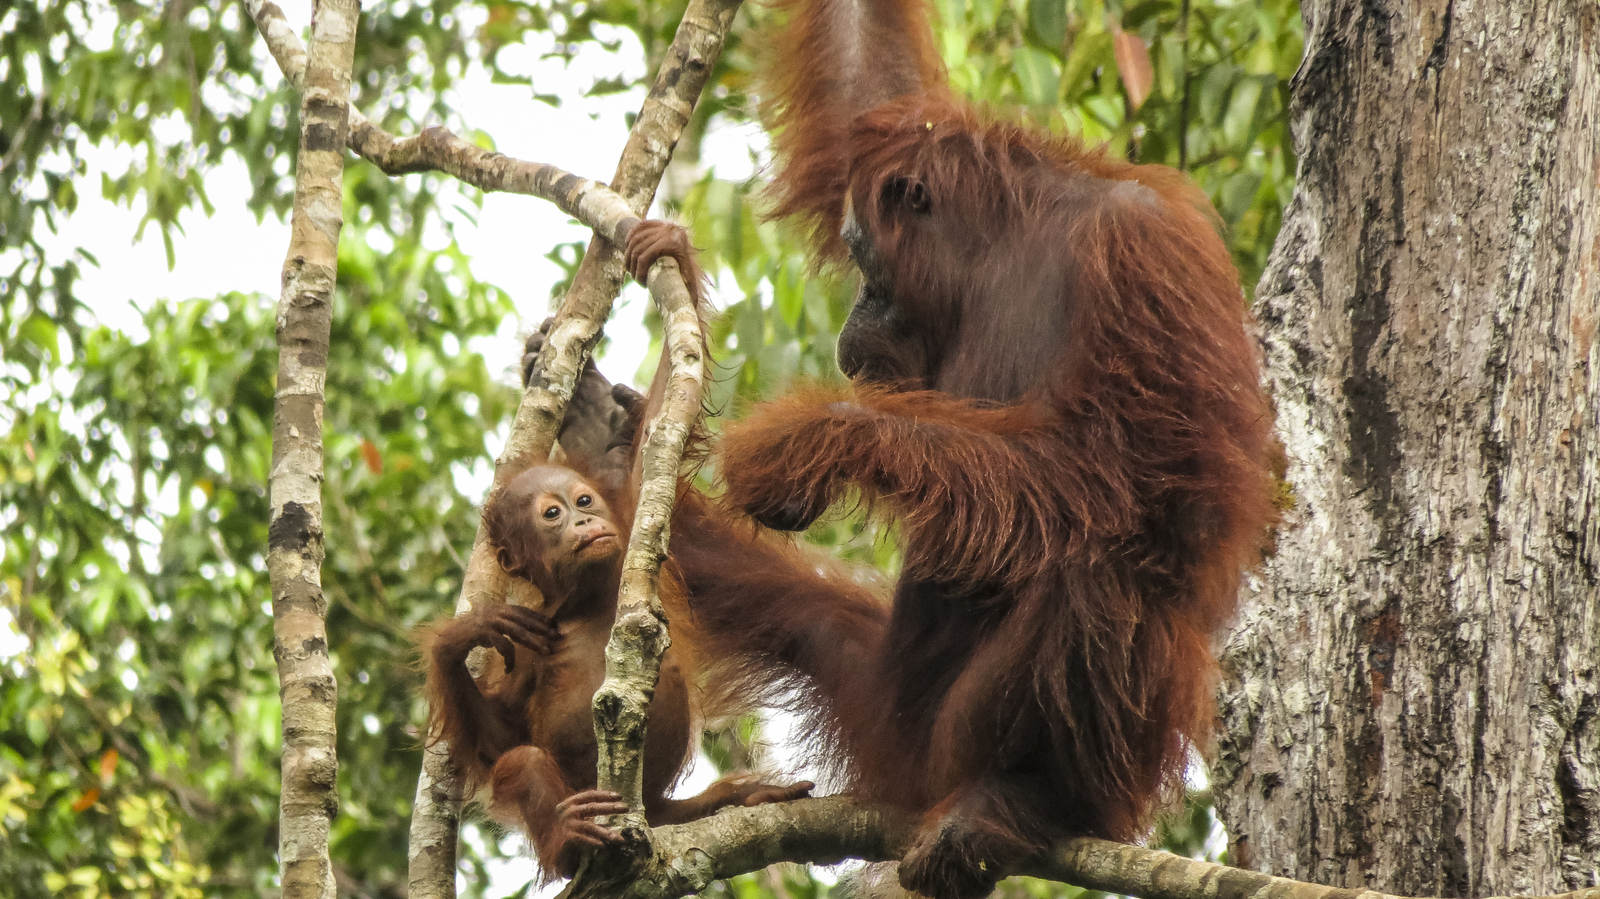 An orangutan and baby in Tanjung Puting National Park in Borneo, Indonesia. Photo © The Nature Conservancy (Katie Hawk)